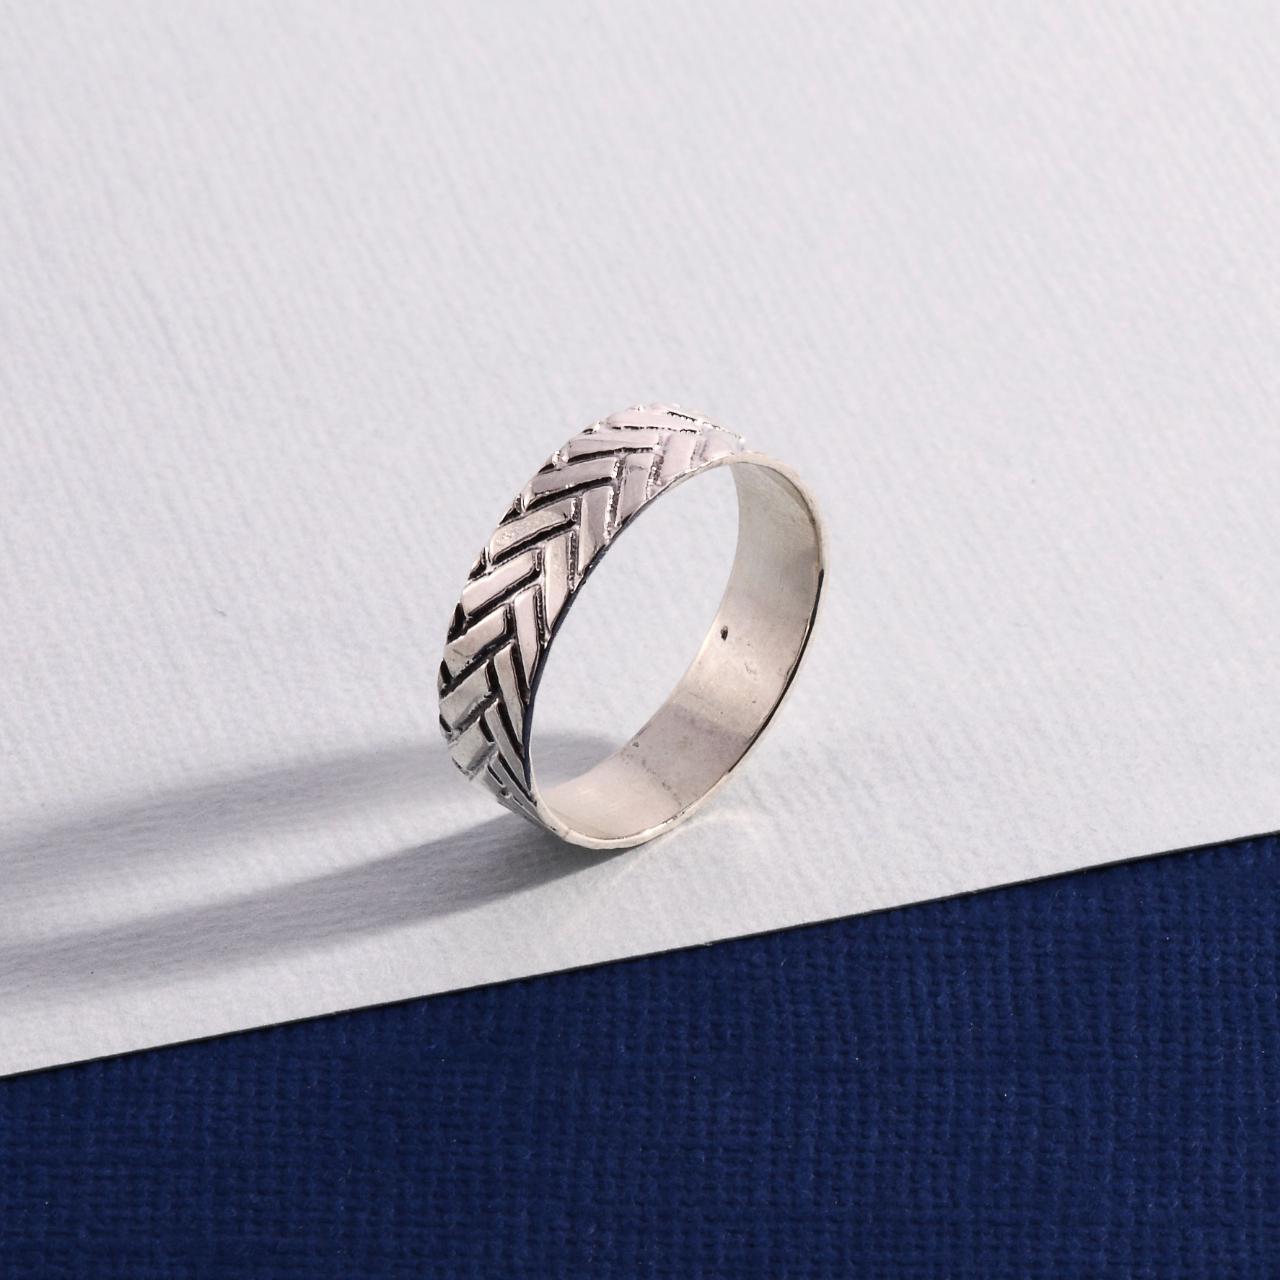 Product Image 1 - Sterling Silver Ring

Size 9

925 Symbol